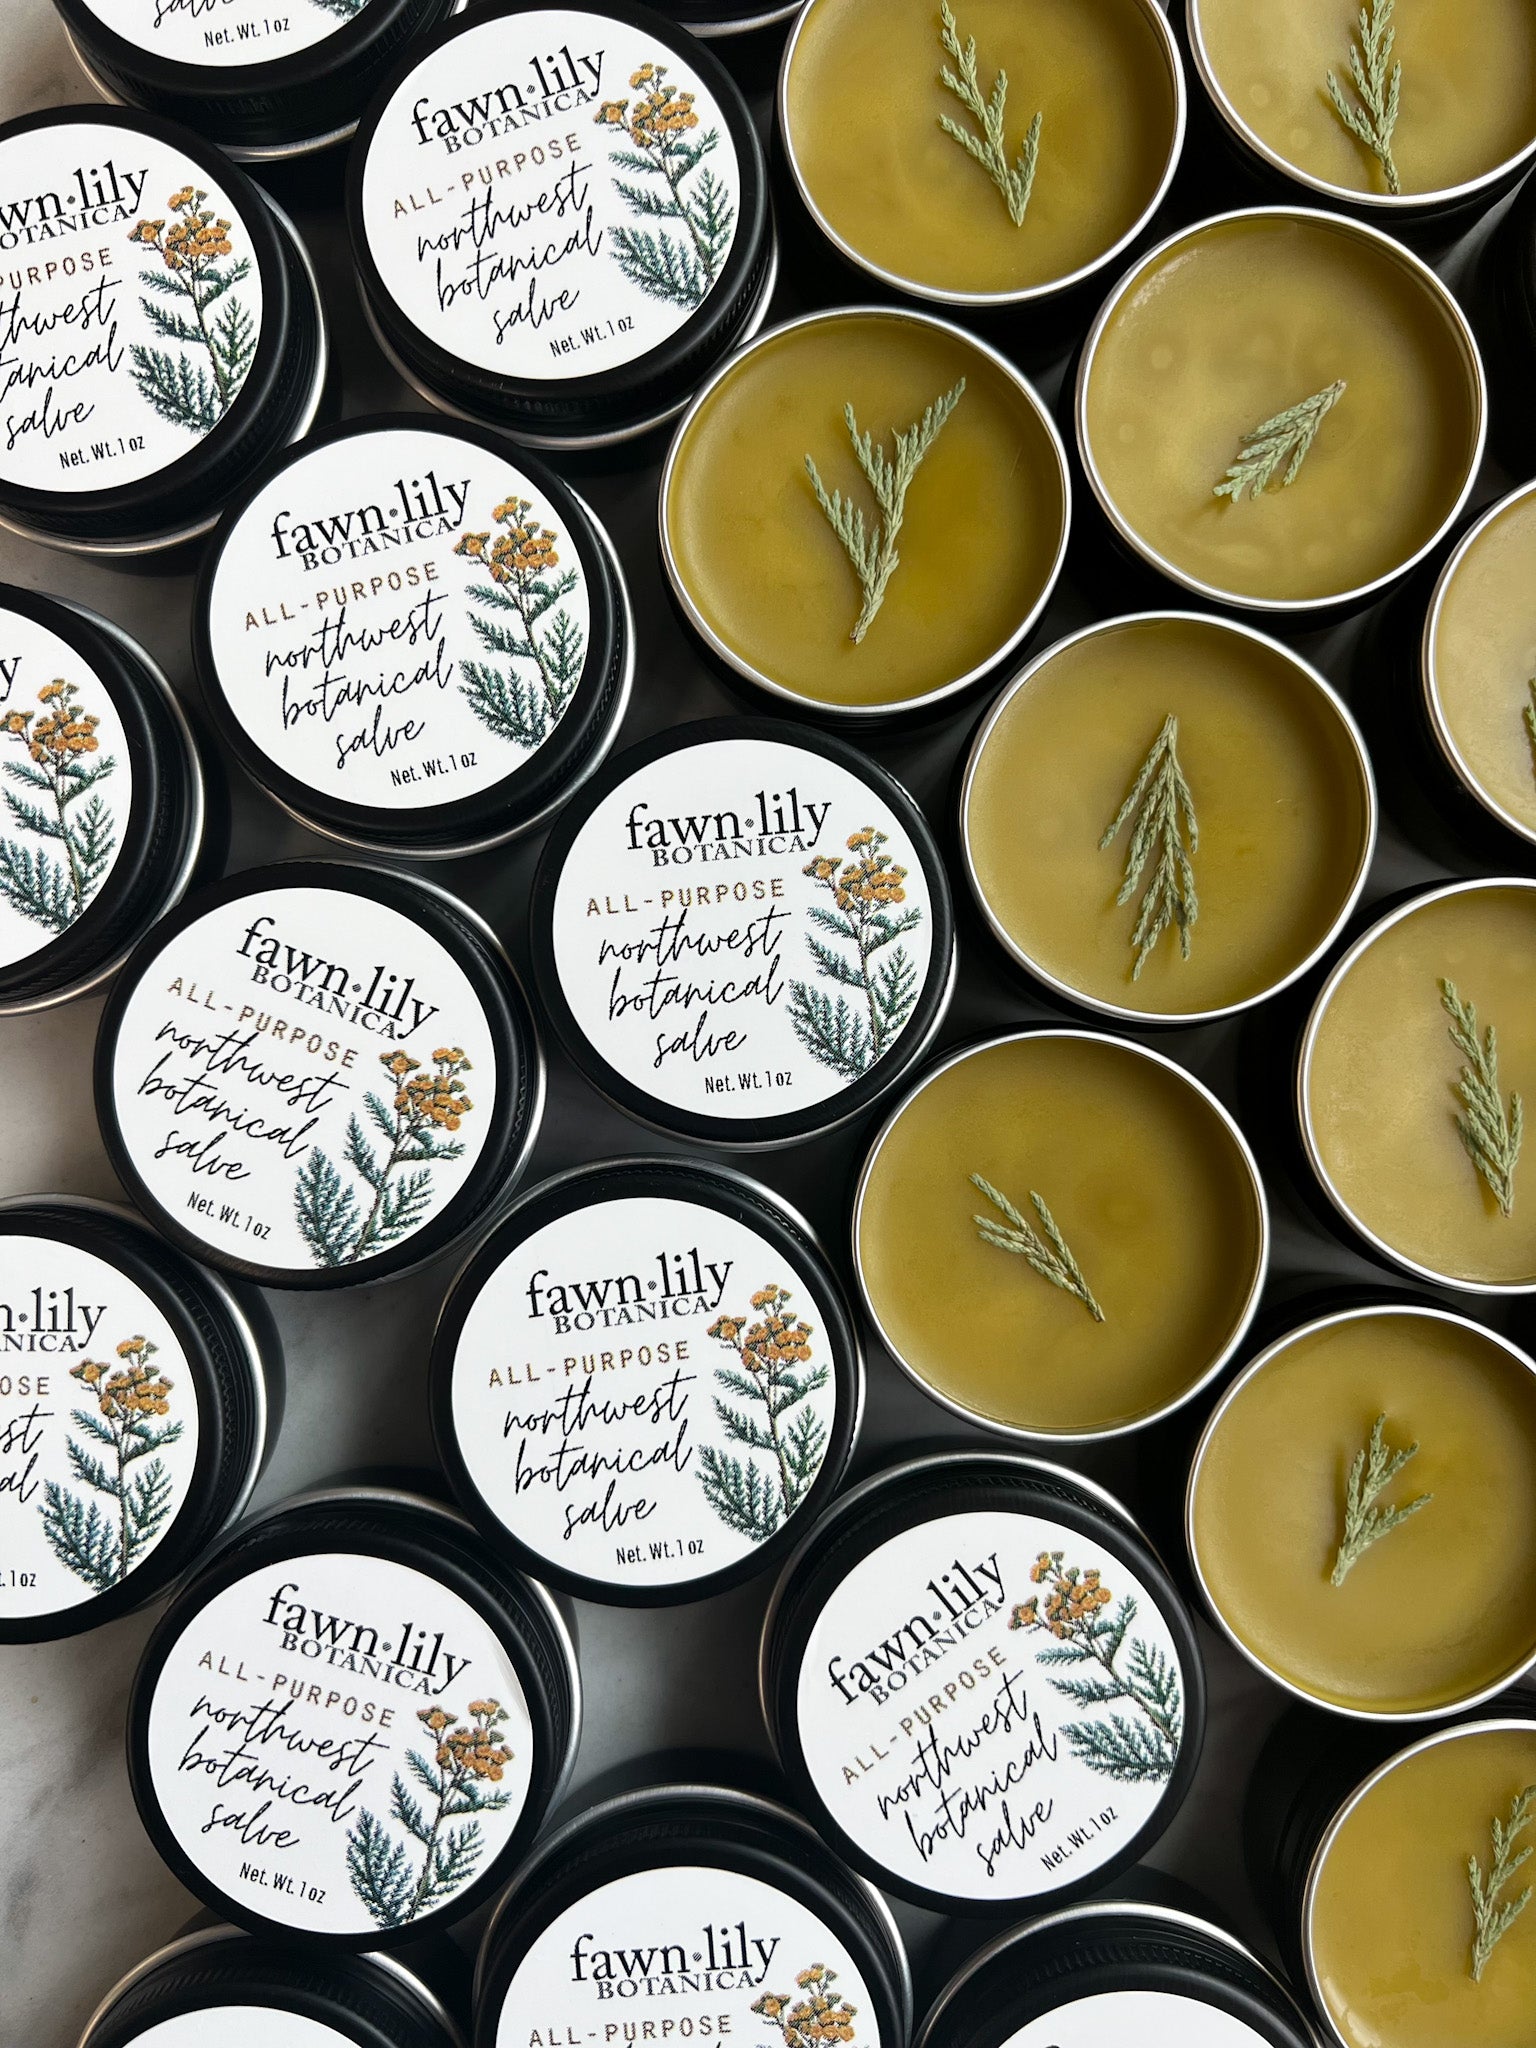 ALL-PURPOSE BOTANICAL SALVE | Fawn Lily Botanica - An ultra-nourishing botanical salve balm made from fresh herbs, flowers, wild plants, and tree tips harvested from the Pacific Northwest bioregion!